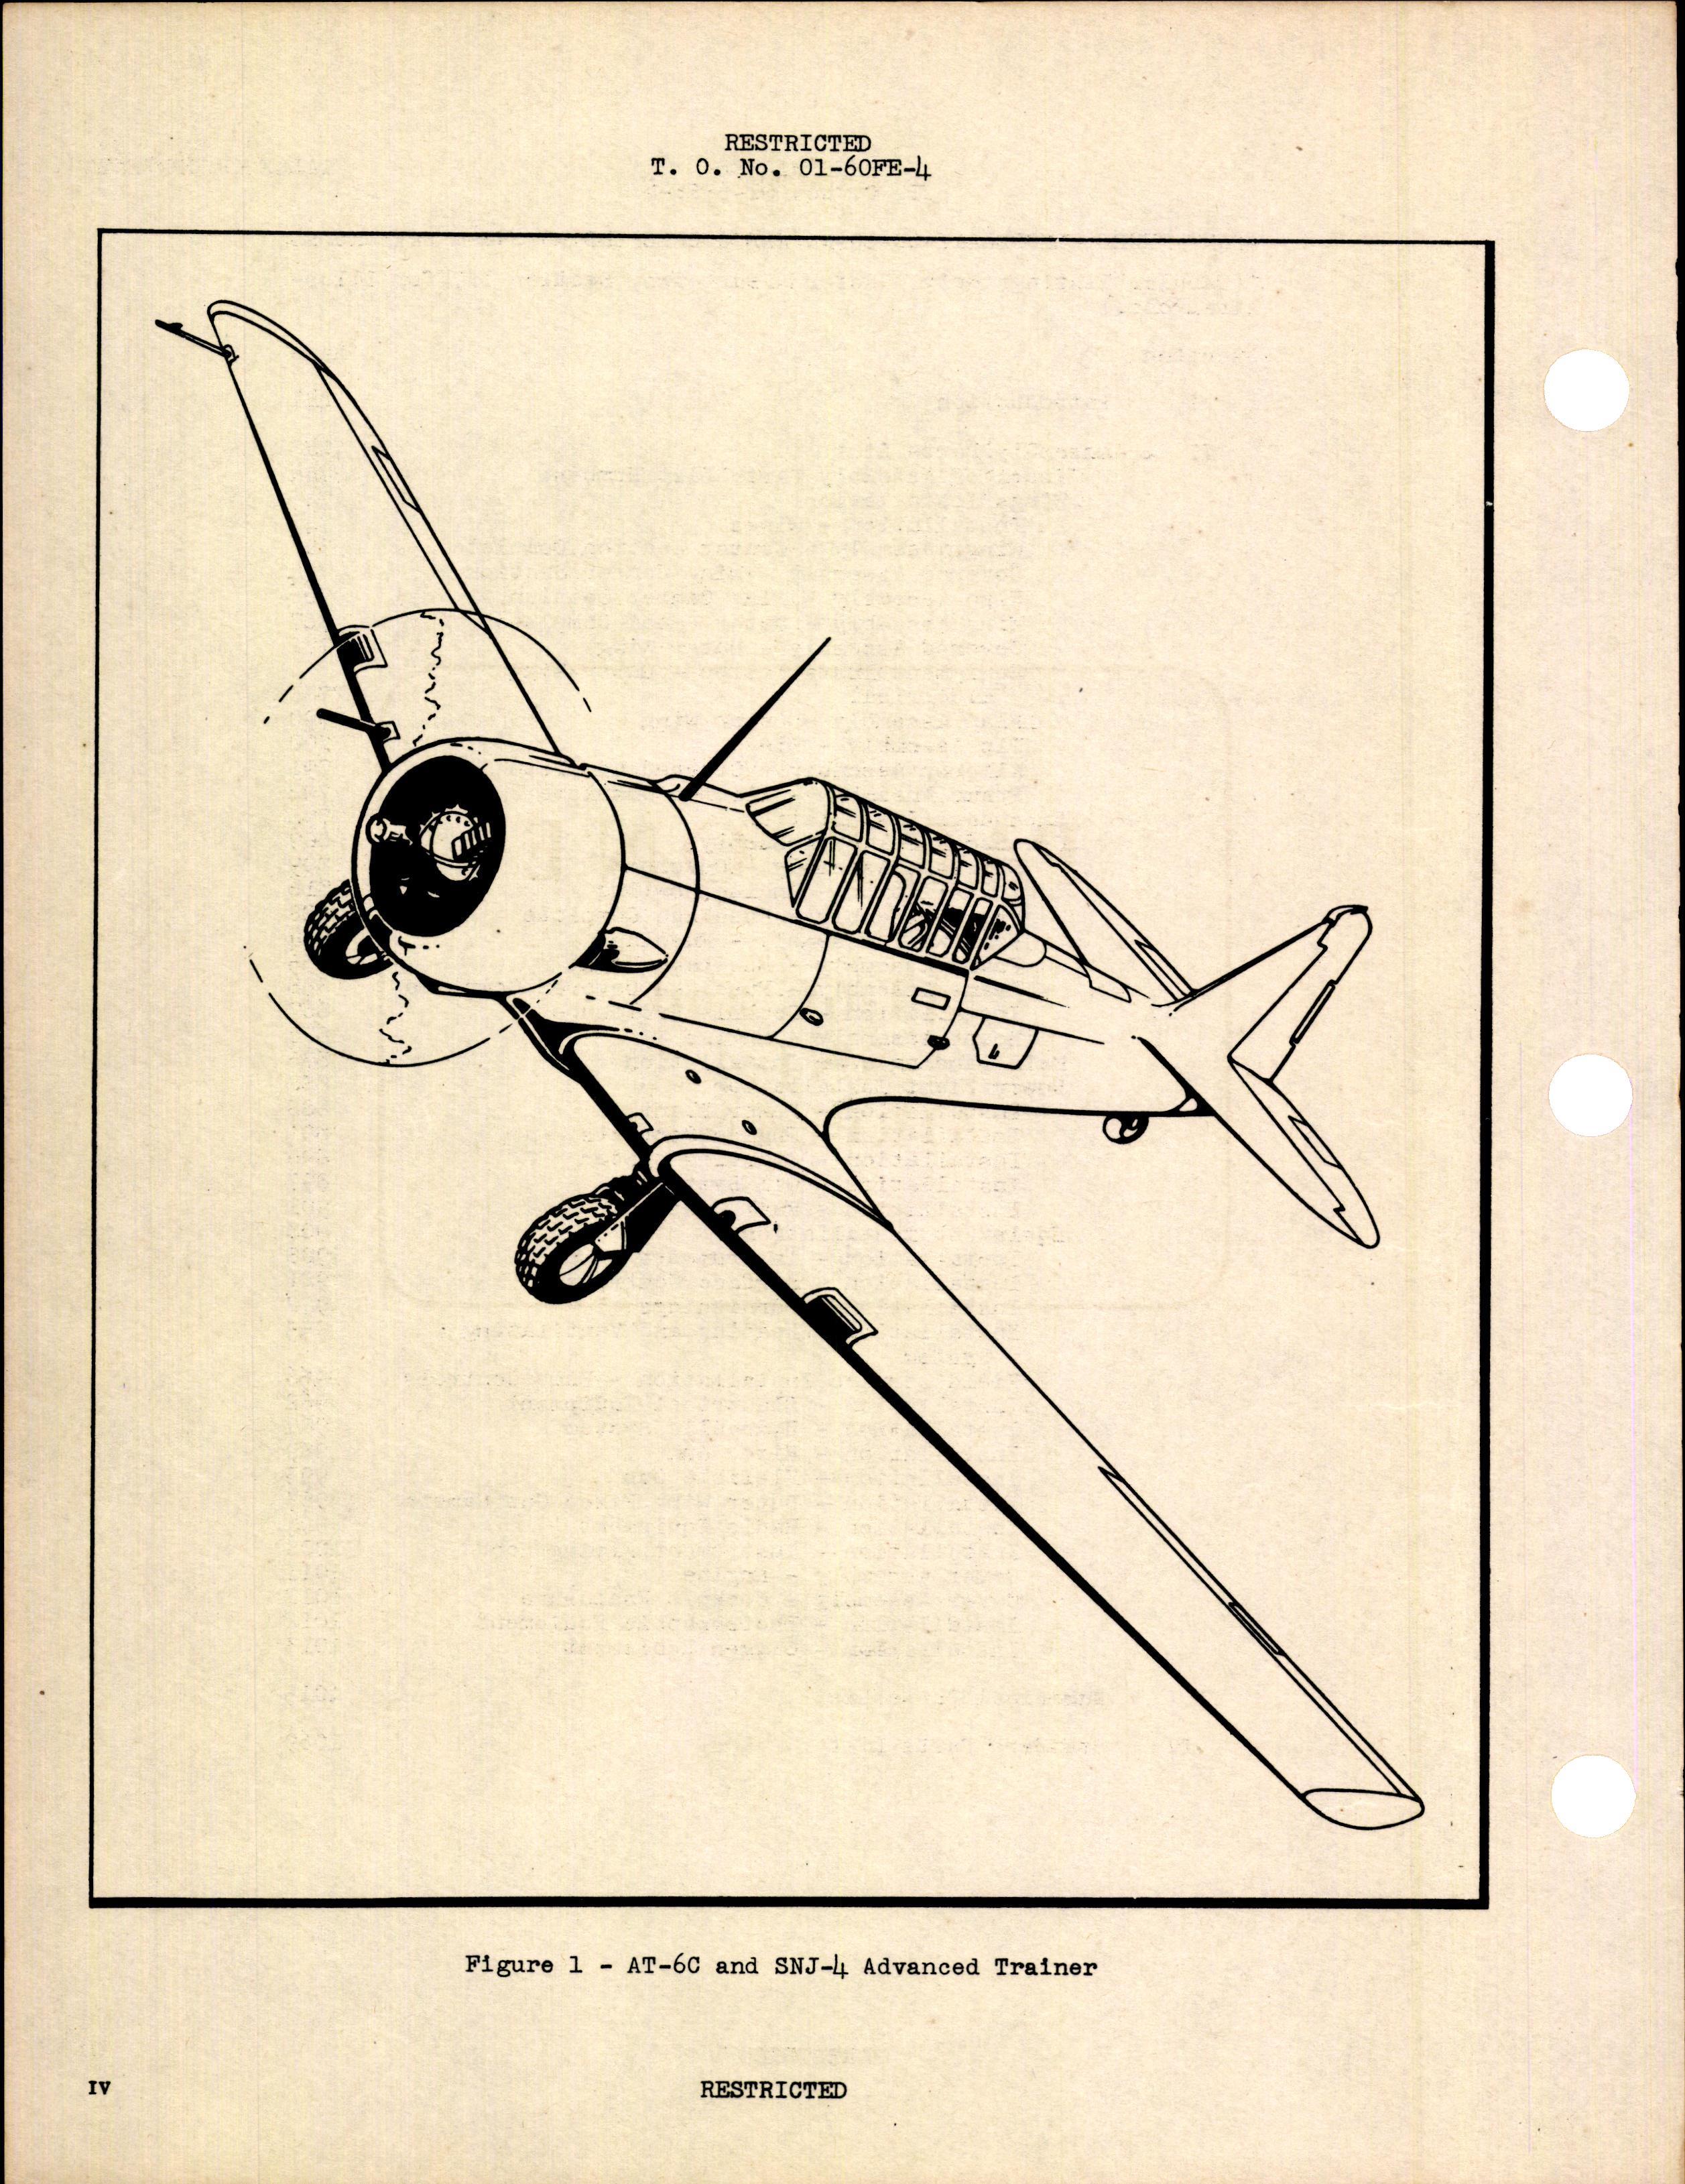 Sample page 8 from AirCorps Library document: Parts Catalog for AT-6C, AT-6C-5, AT-6C-10, AT-6C-15, SNJ-4, and Harvard IIA